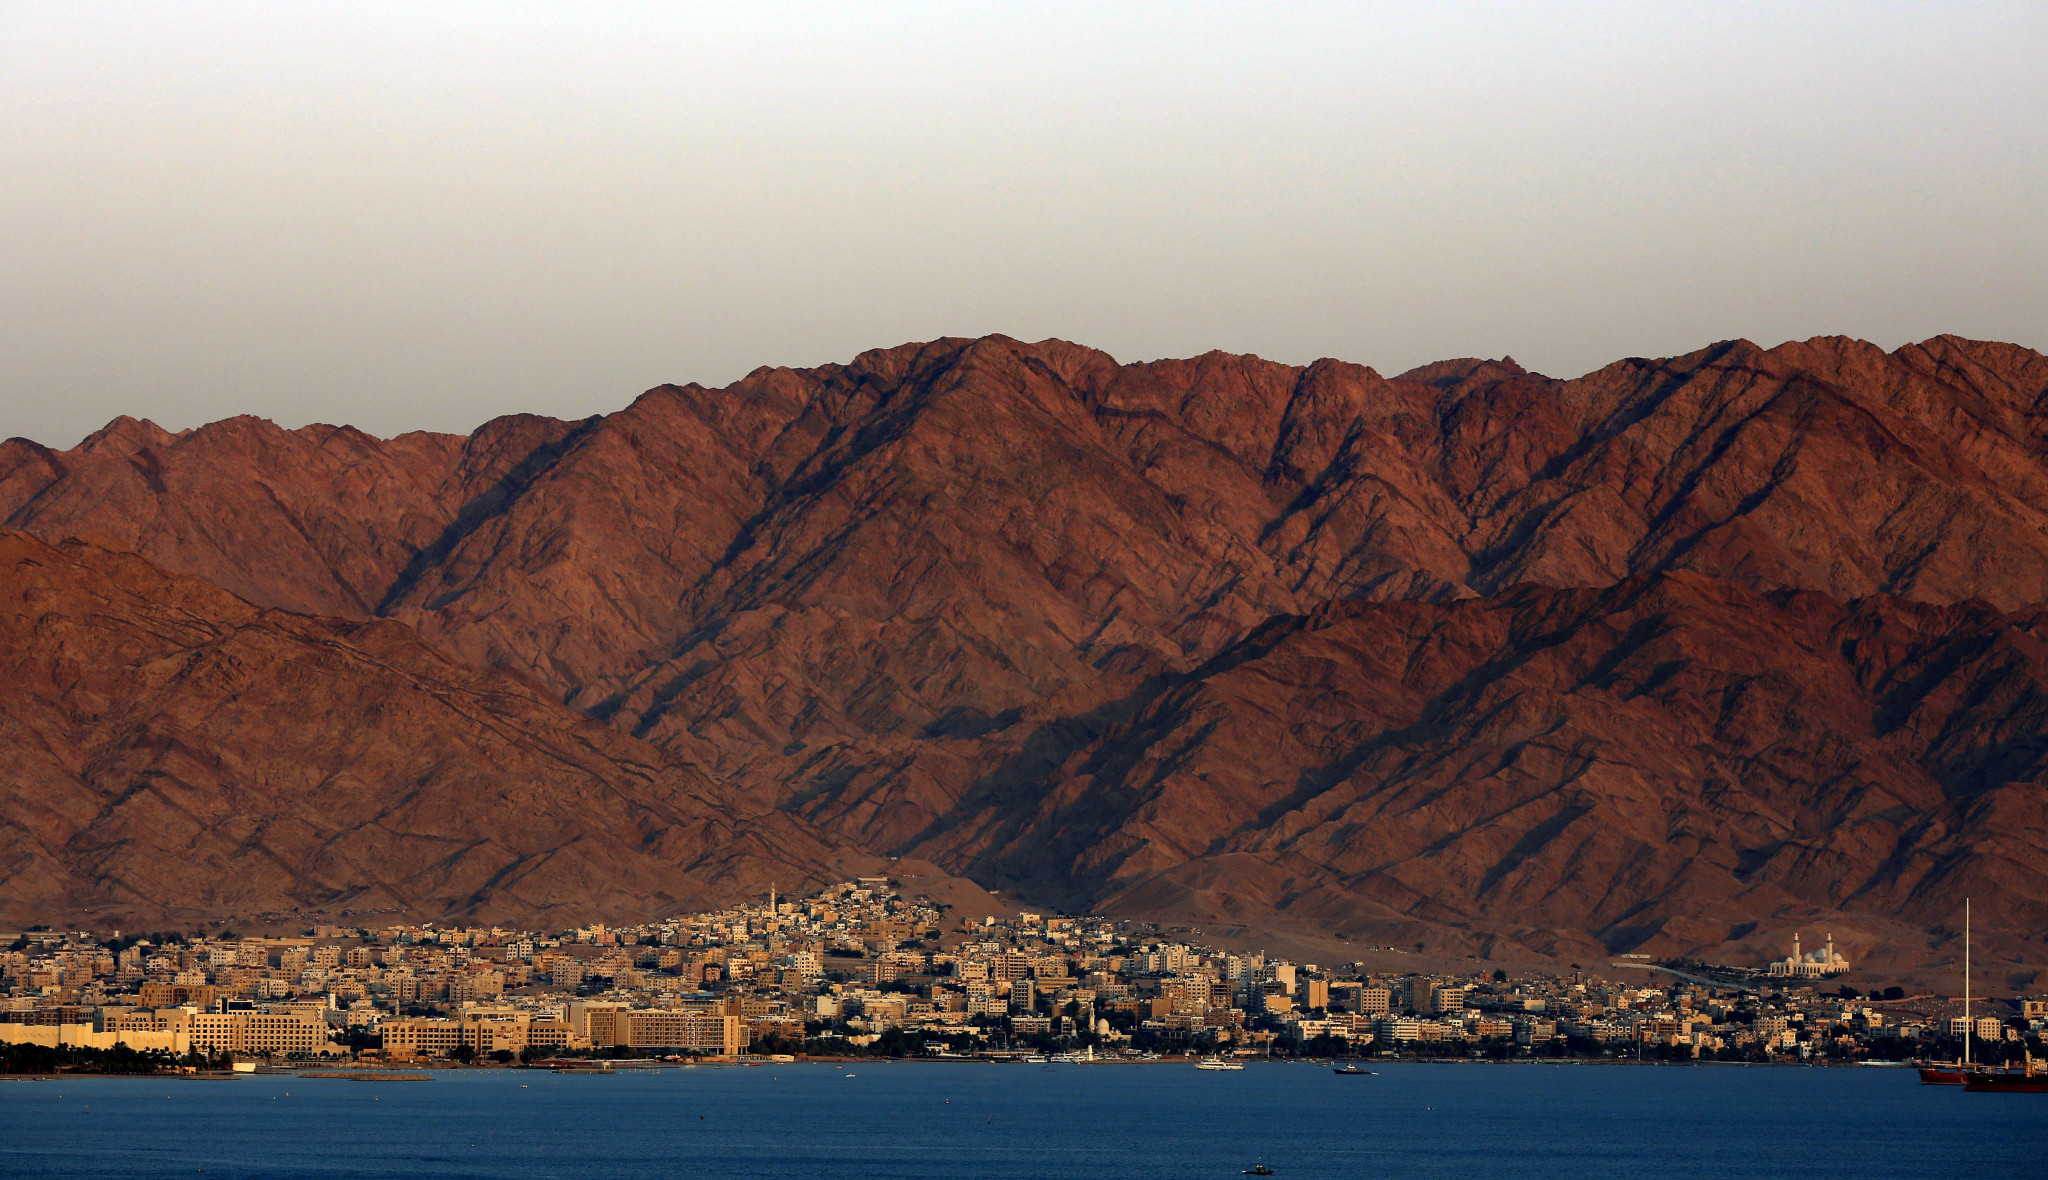 Aqaba in Jordan was due to host the event ©Getty Images